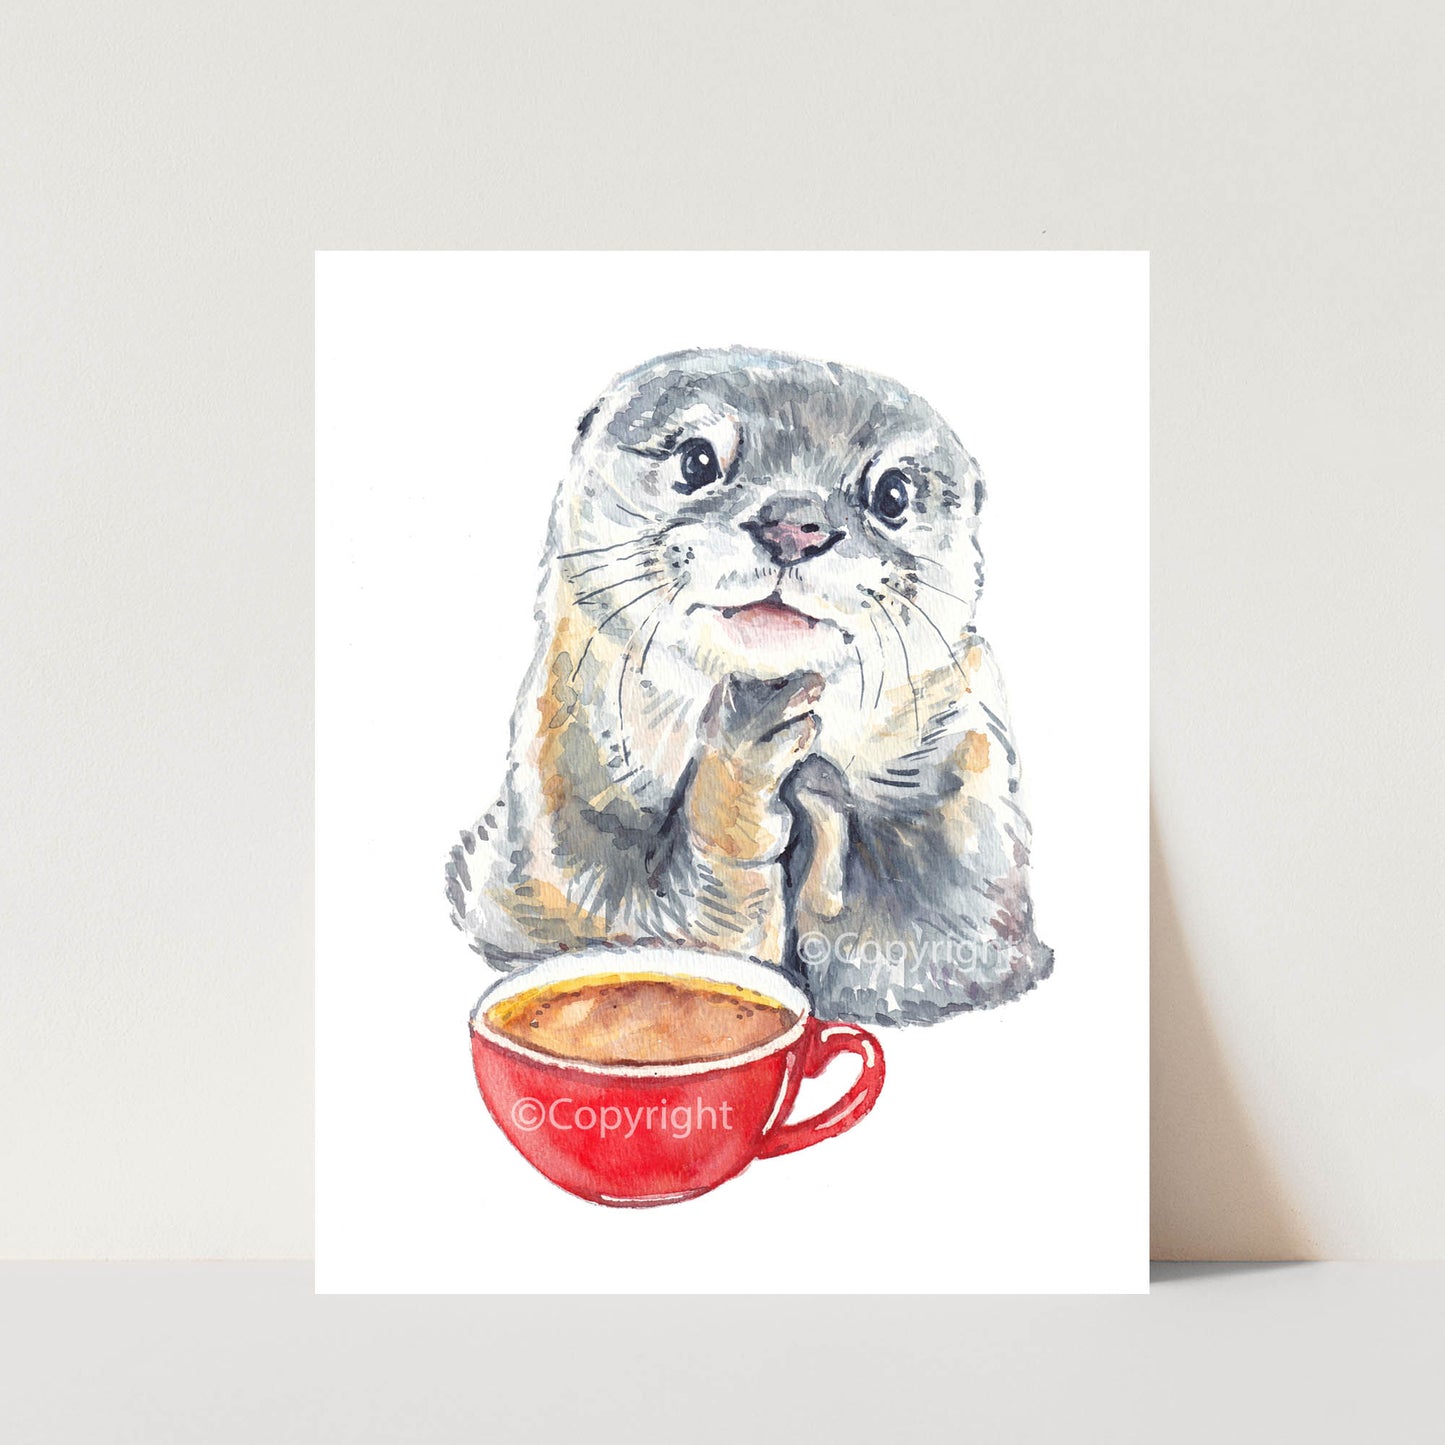 Watercolour painting of an otter daydreaming while drinking a cup of coffee at a cafe. Art by Deidre Wicks